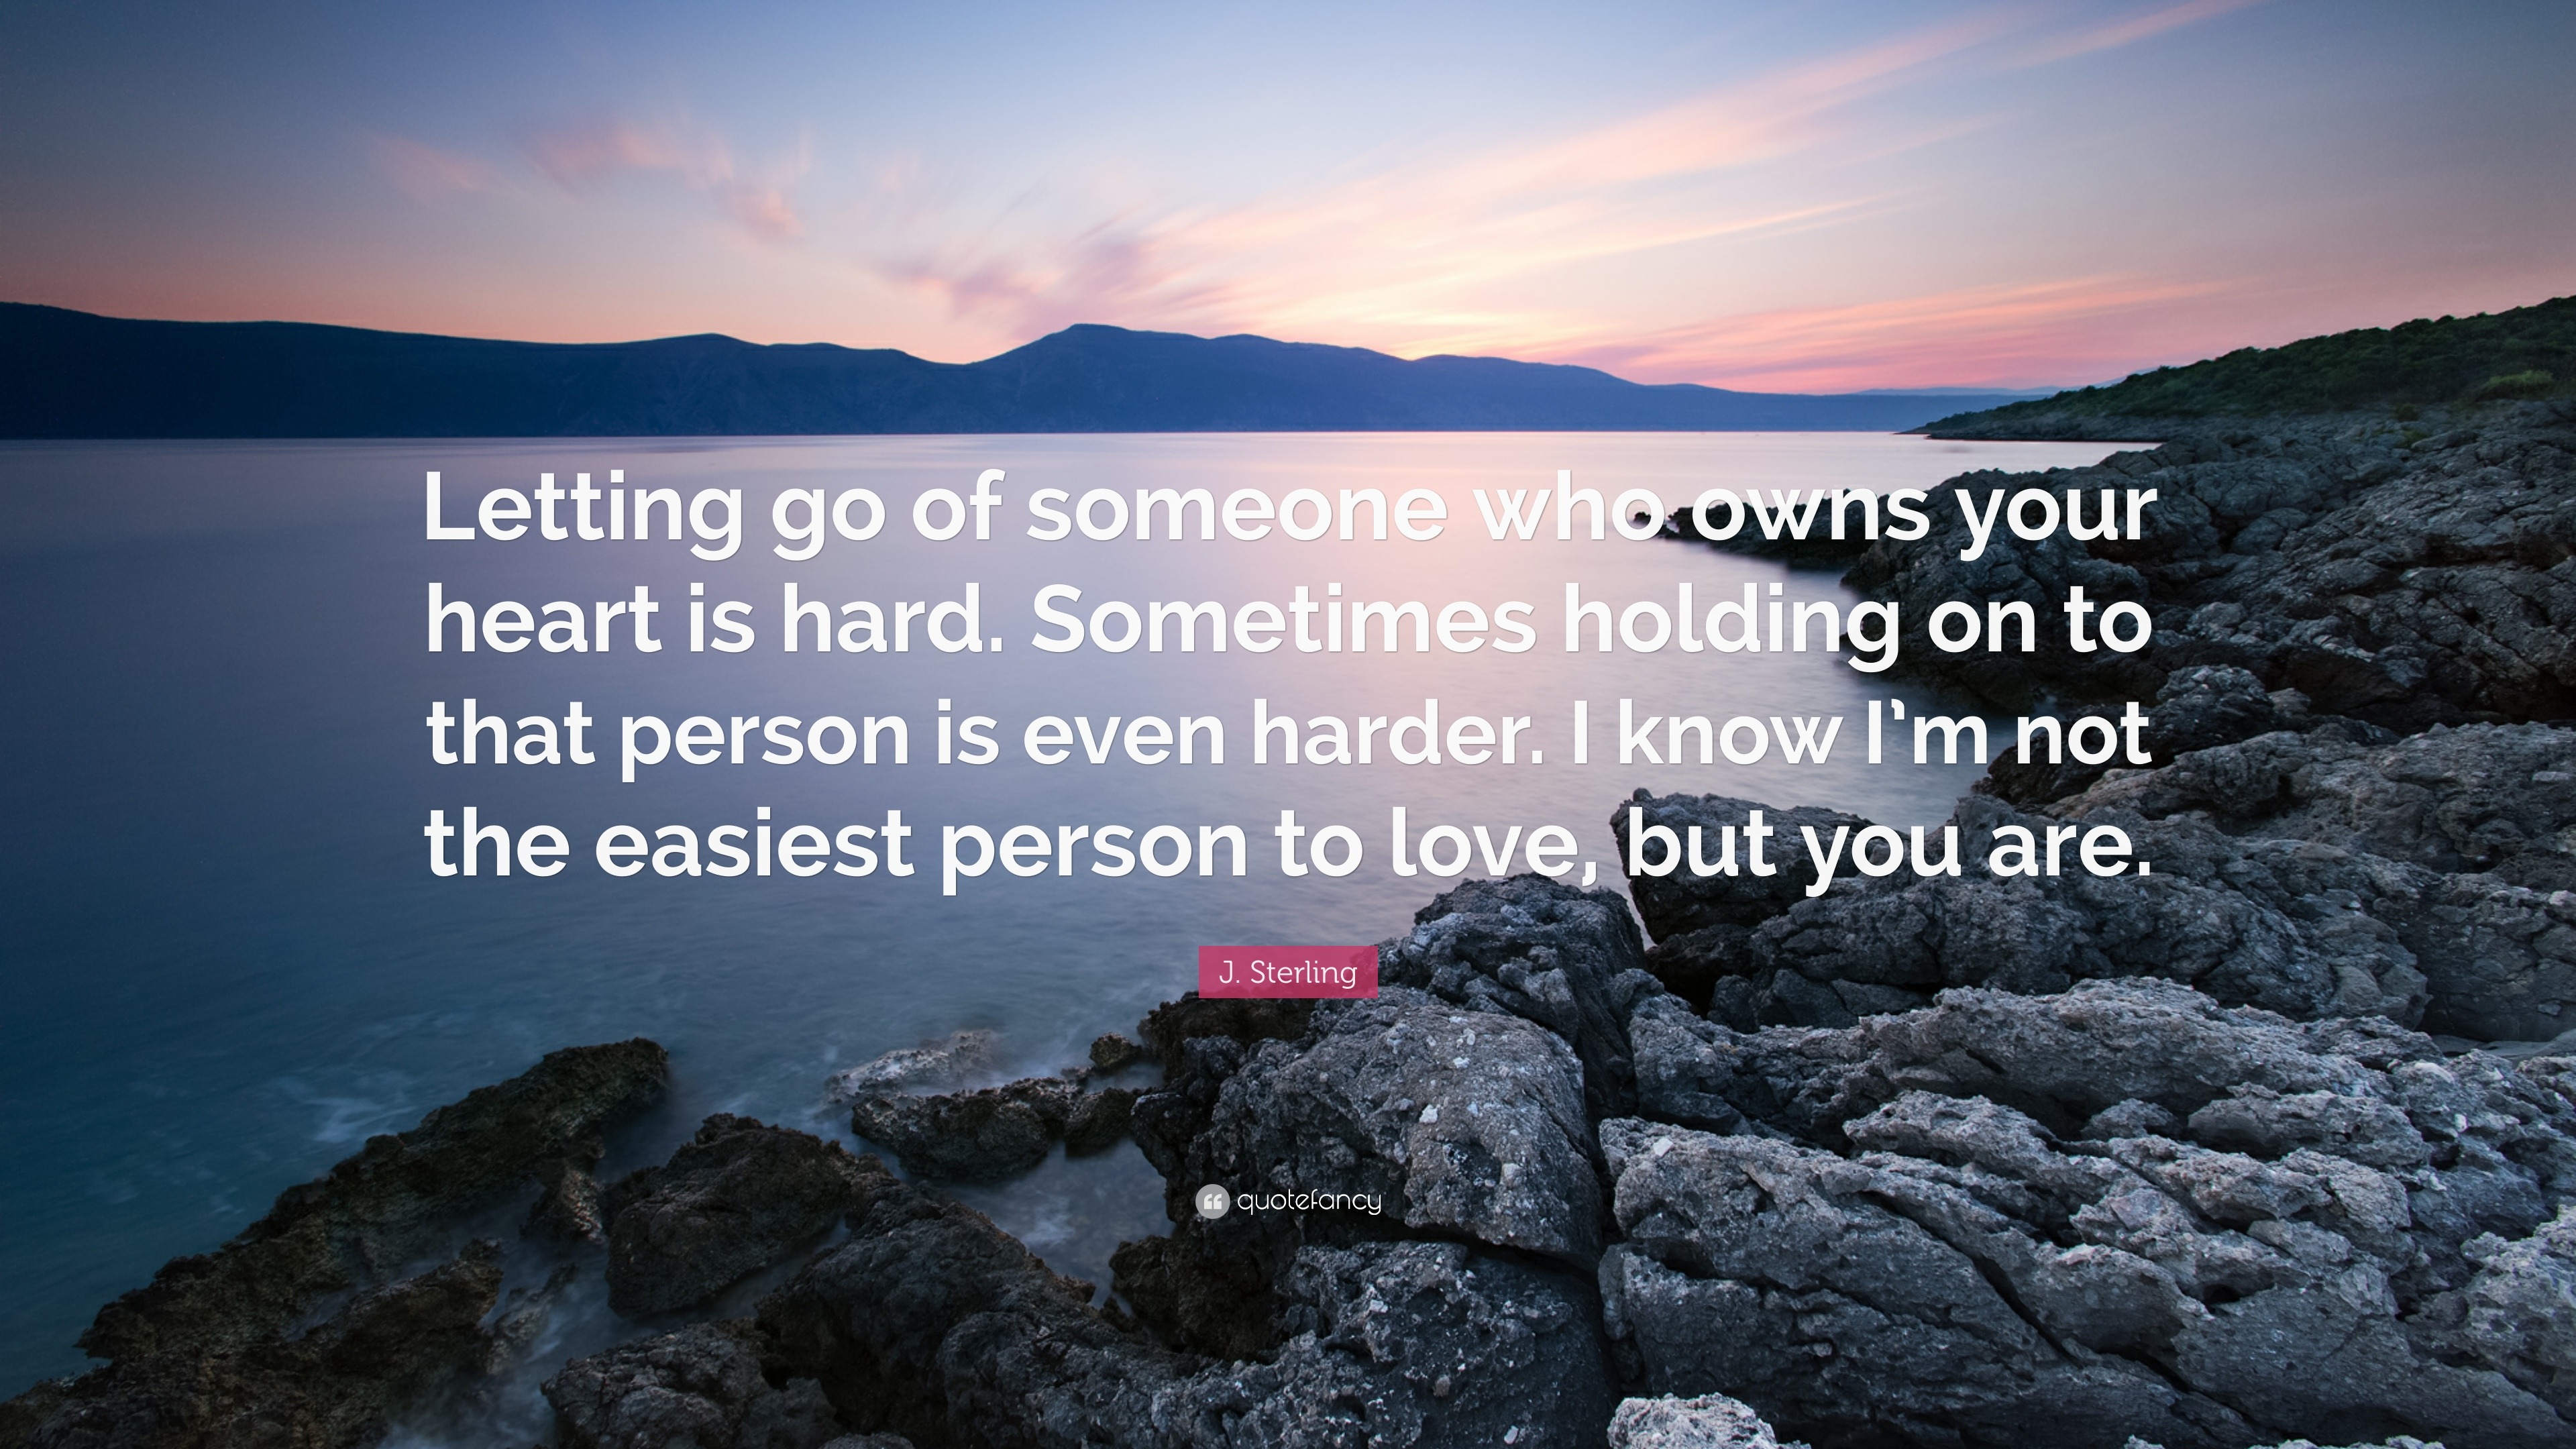 J Sterling Quote “Letting go of someone who owns your heart is hard